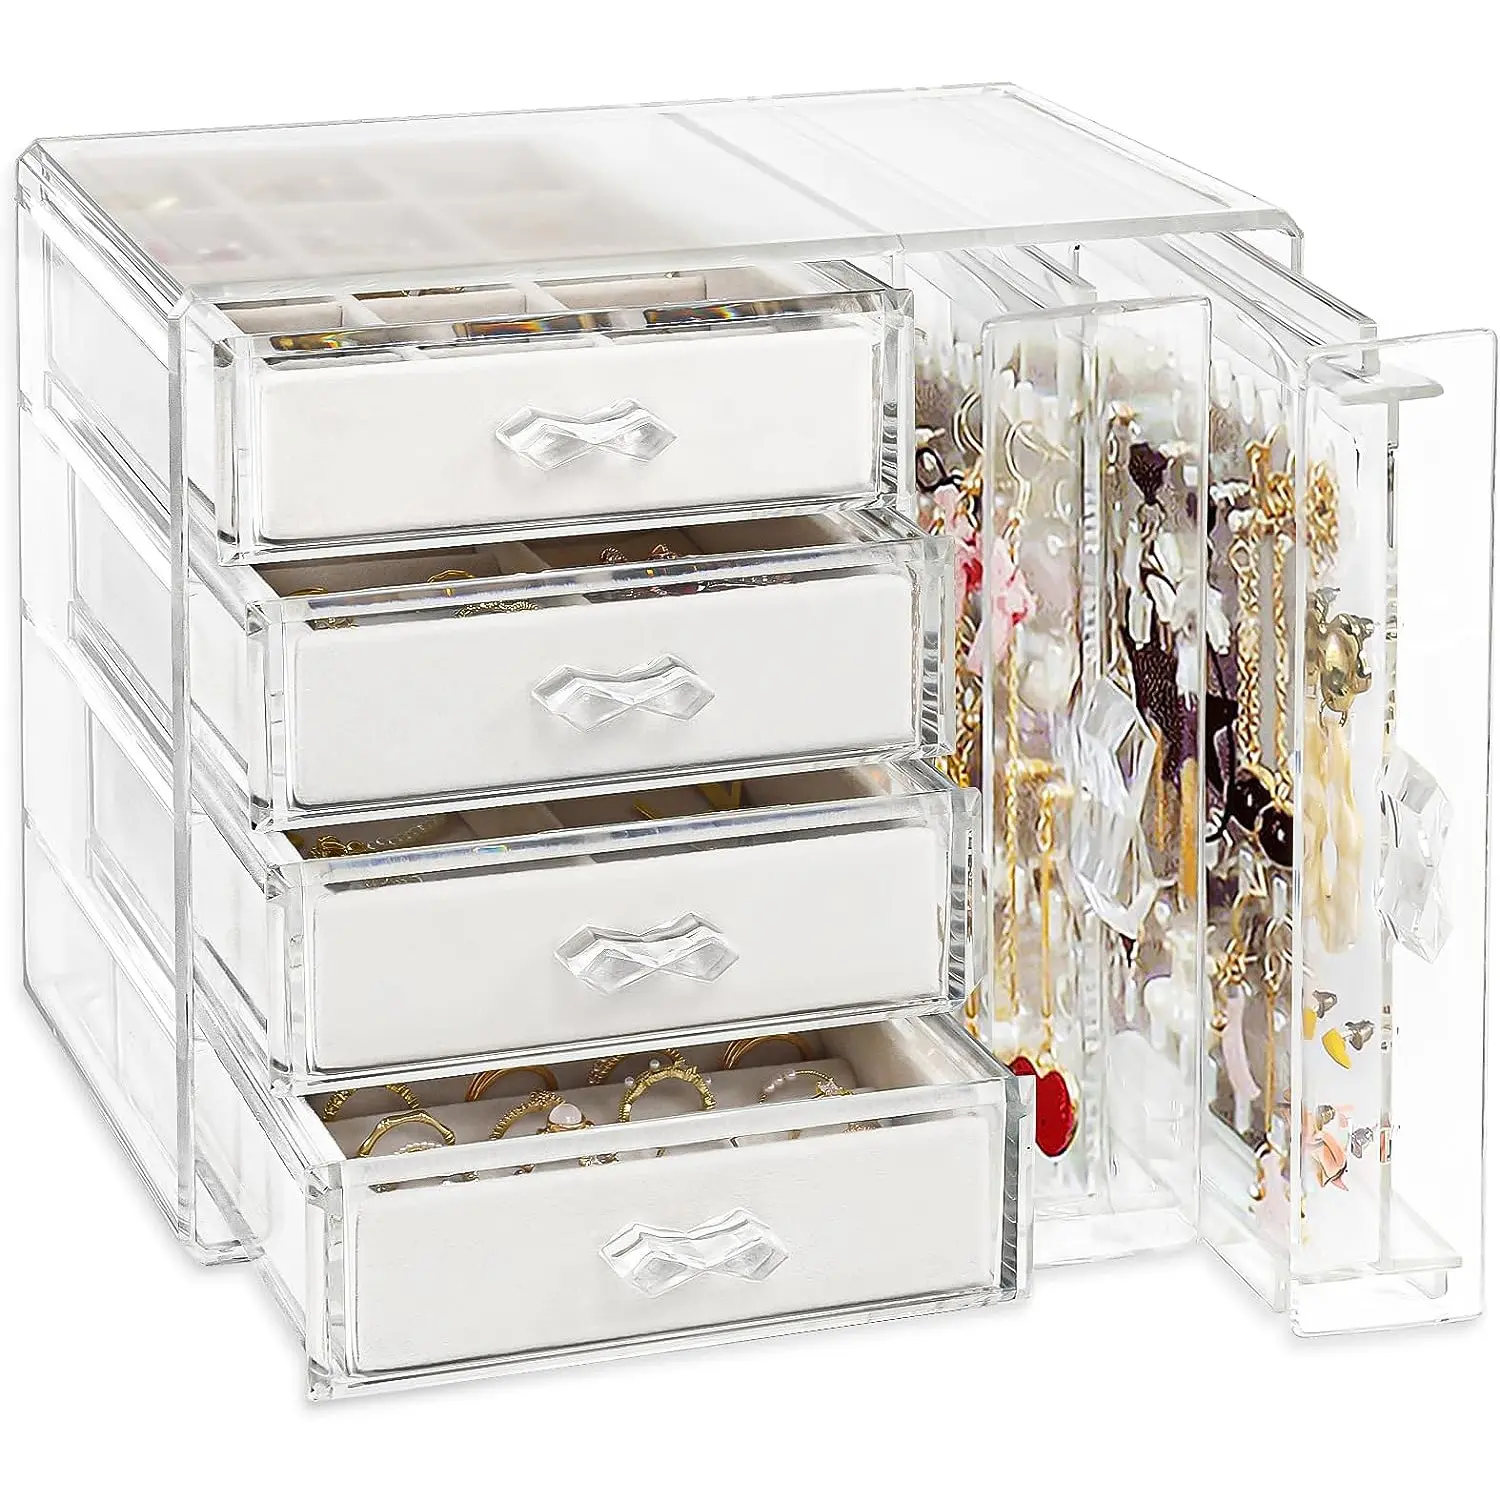 Clear Earring Holder Jewelry Necklace Hanging Display Case Acrylic Jewelry Organizer Box with 4 Velvet Drawers for Women Girls